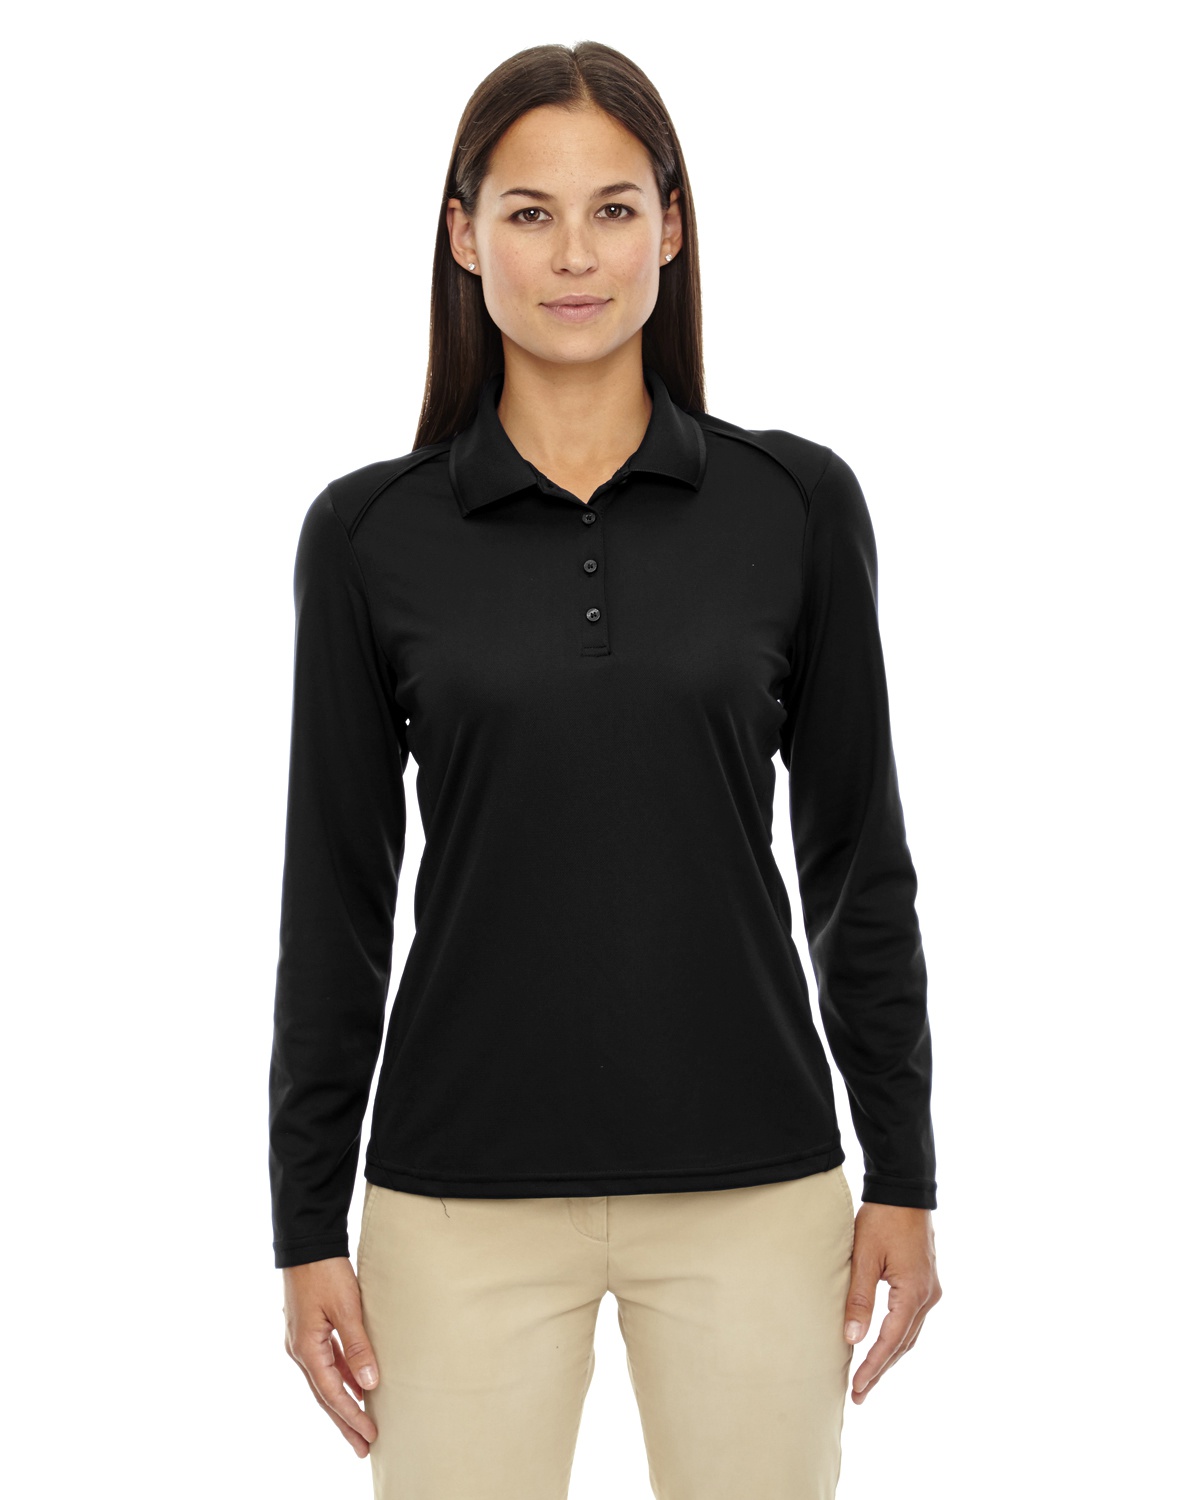 'Ash City - Extreme 75111 Ladies Eperformance Snag Protection Long-Sleeve Polo'